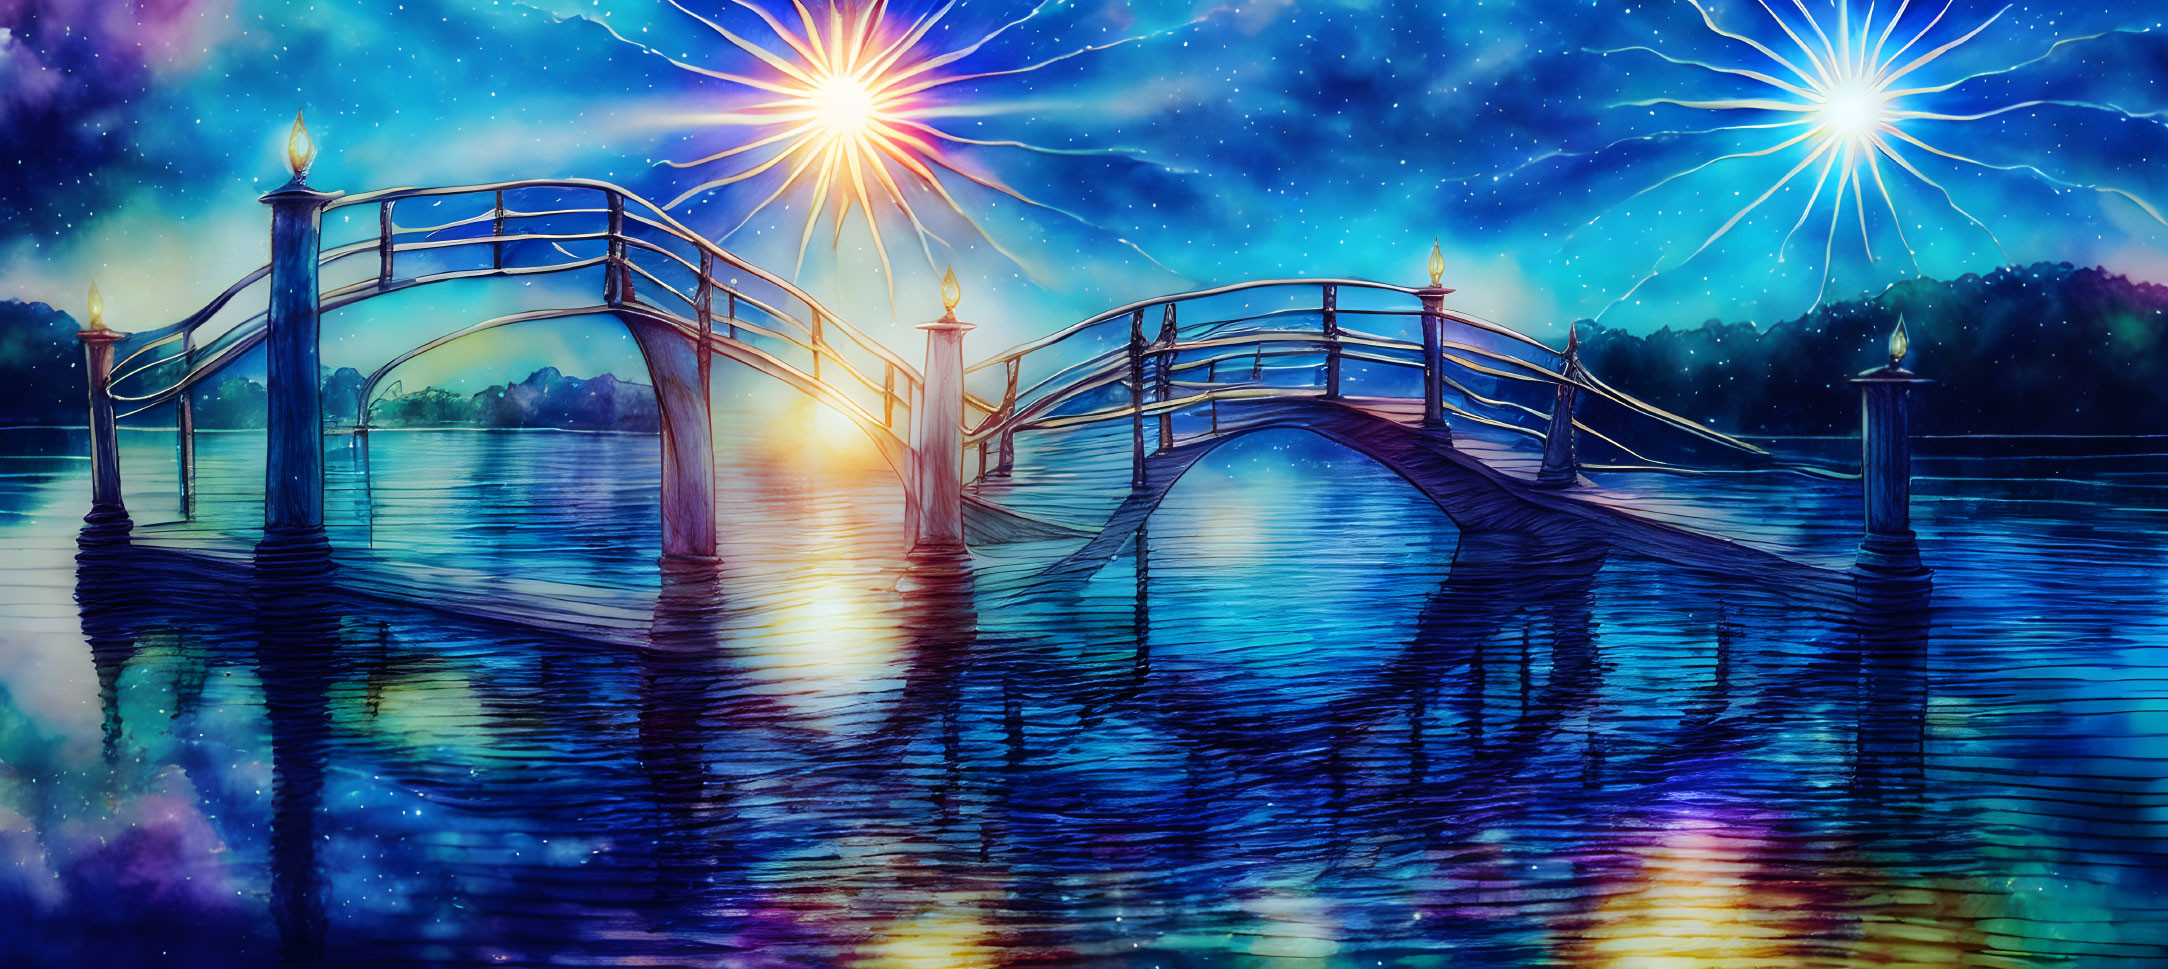 Artistic rendering of wooden bridge over water with star-like lights reflecting at night